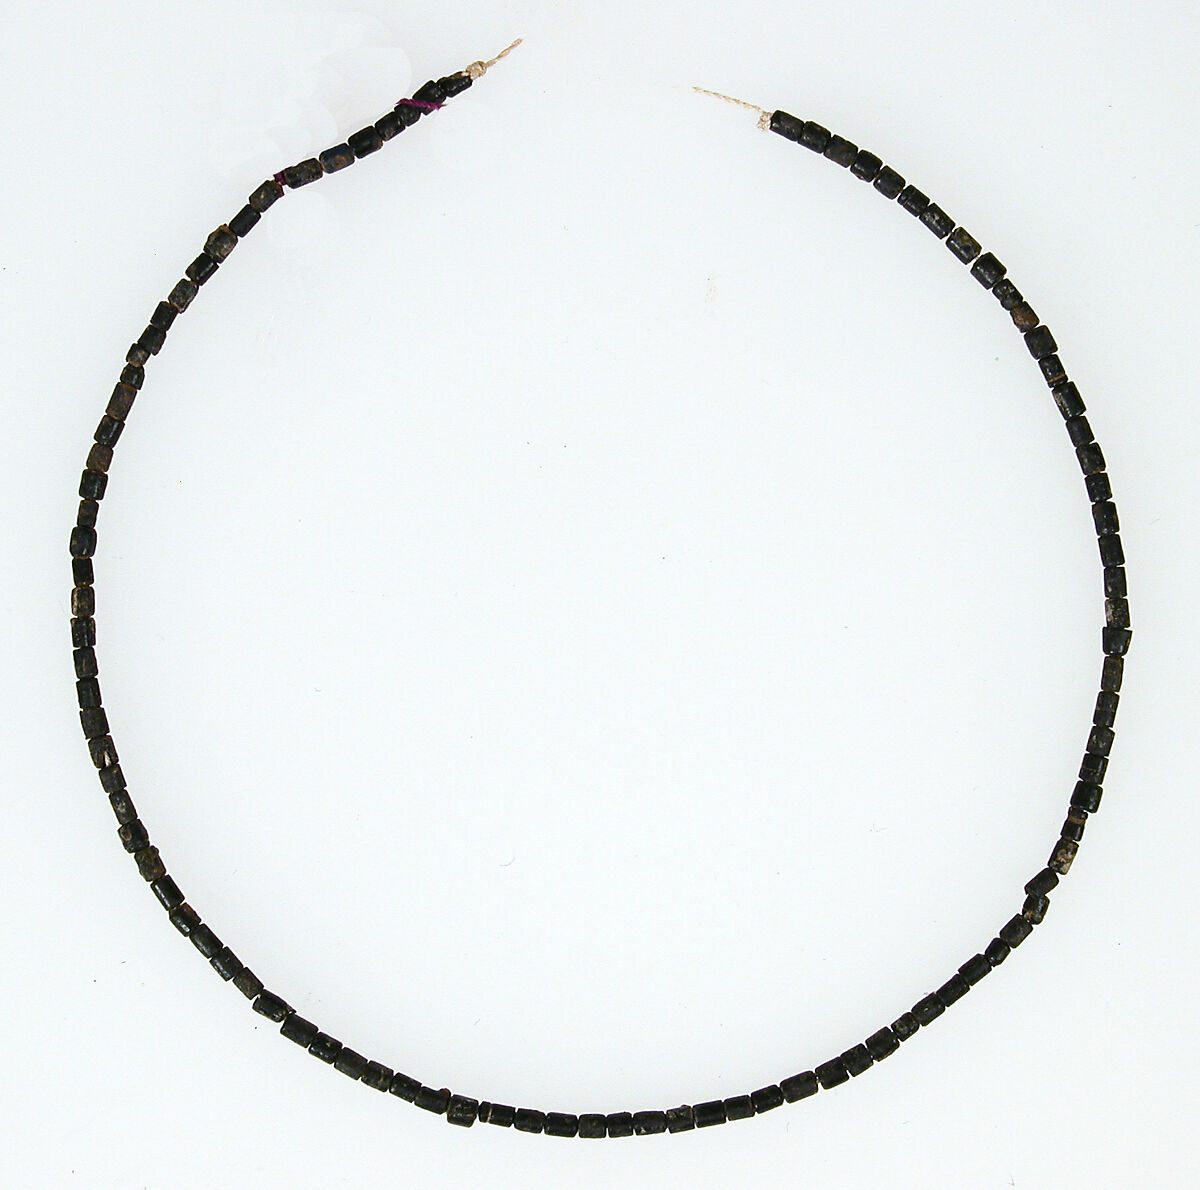 String of Beads, Earthenware, glazed (black faience), Coptic 